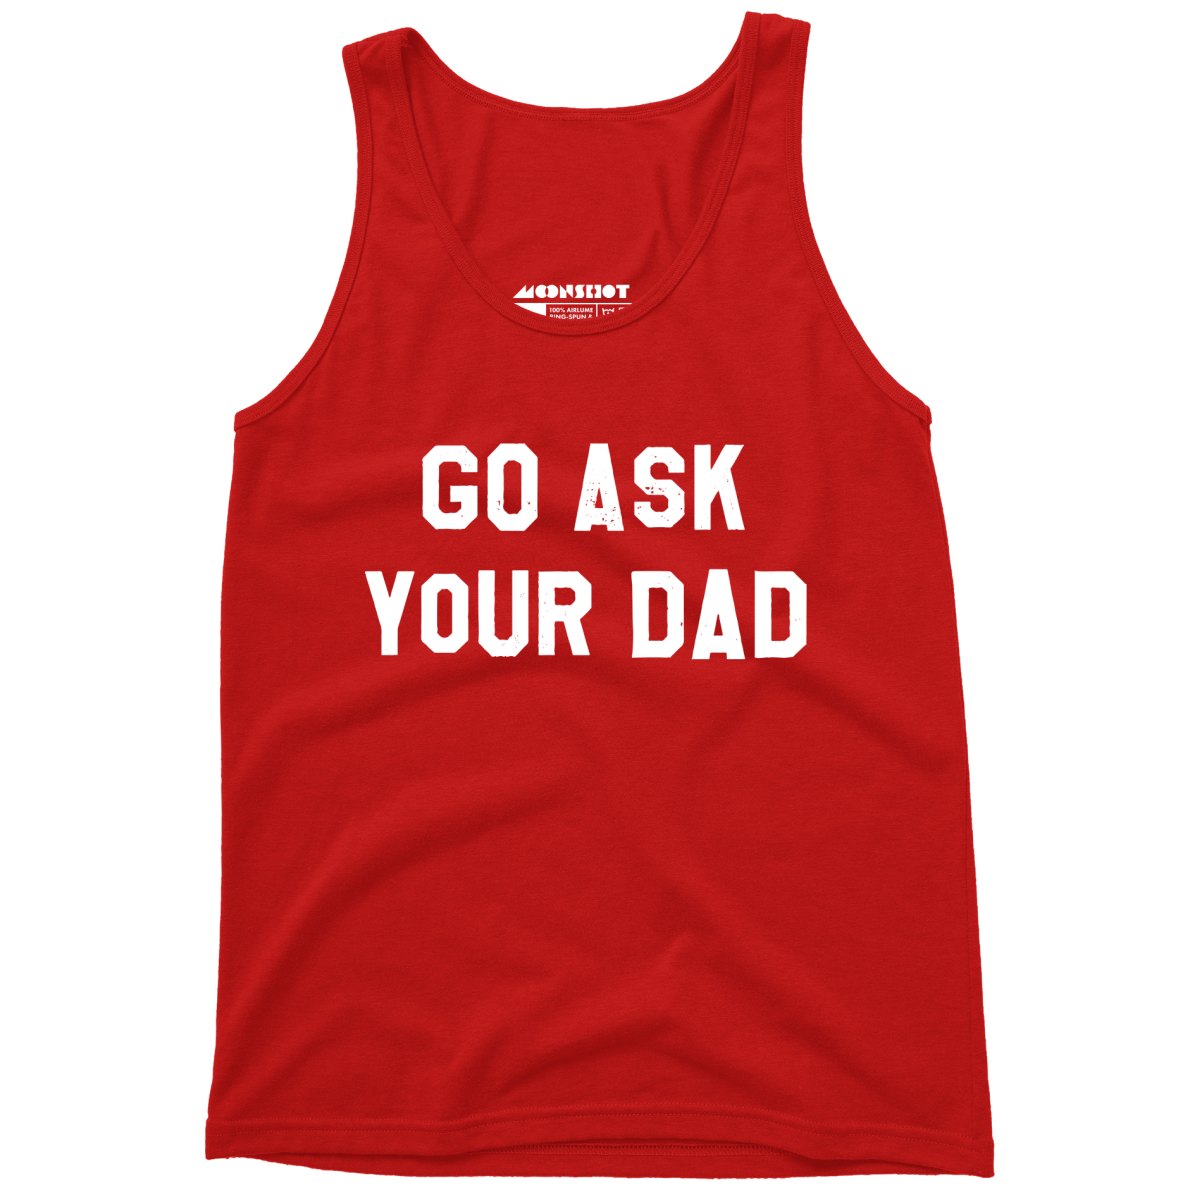 Go Ask Your Dad - Unisex Tank Top